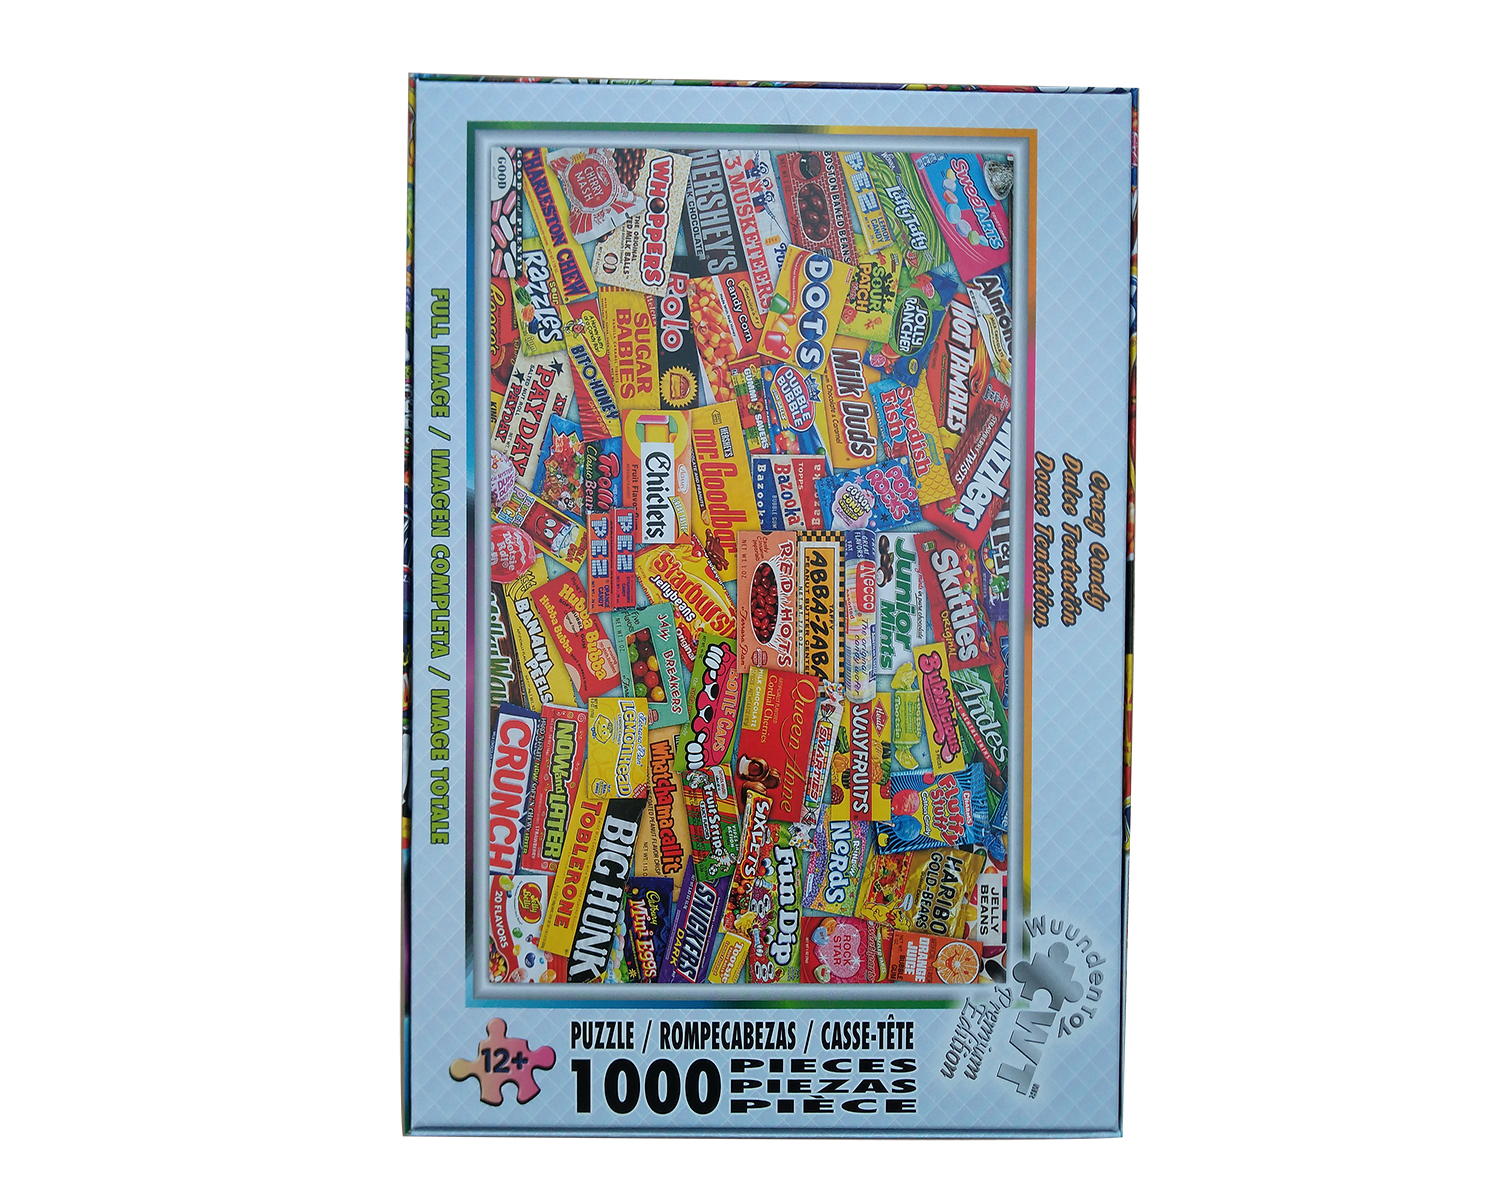 Wuundentoy Premium Edition "Crazy Candy" 1000 Pieces Jigsaw Puzzle - image 4 of 4